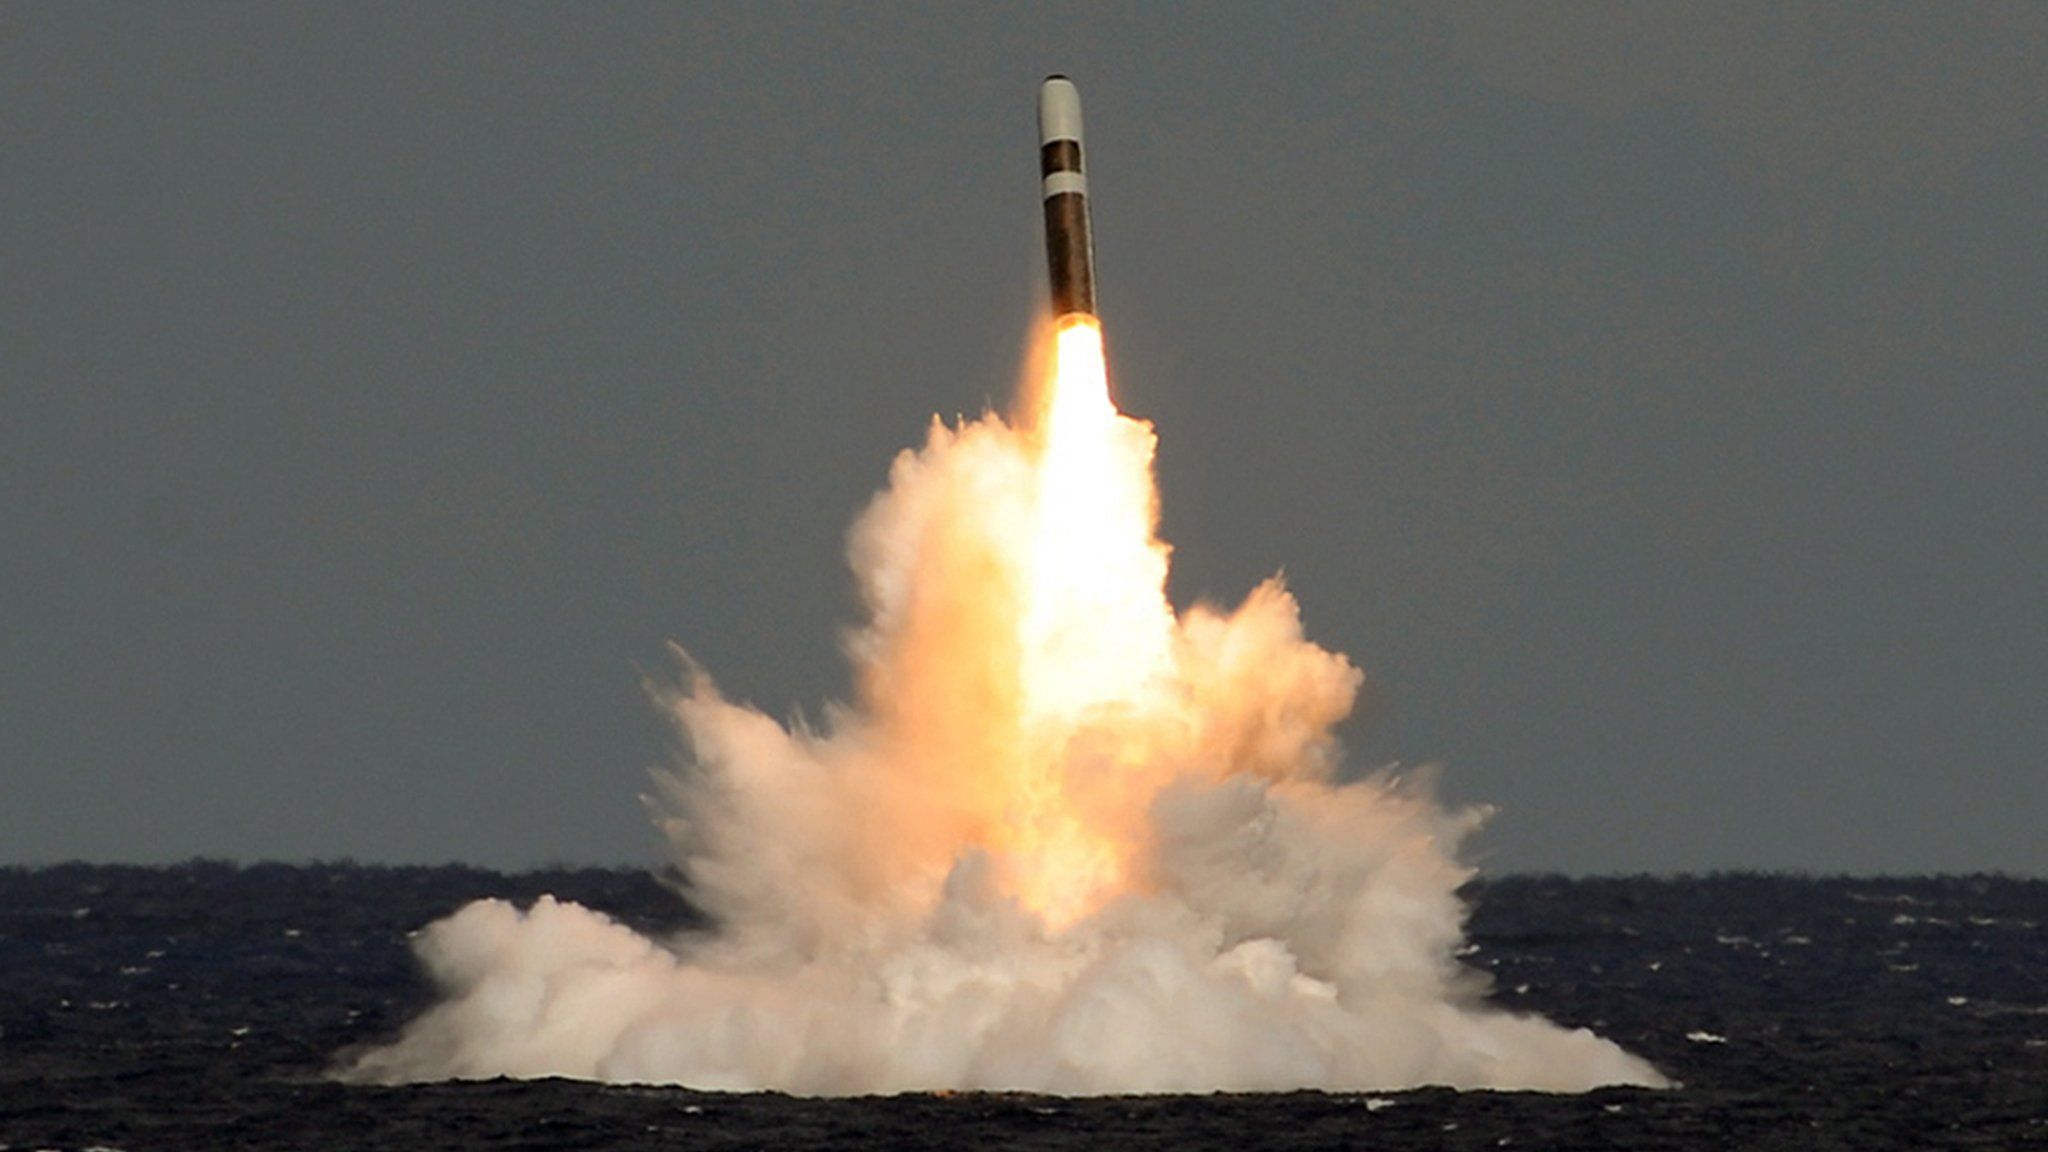 Unarmed Trident II (D5) ballistic missile fired by HMS Vigilant during a test launch in the Atlantic Ocean in October 2012